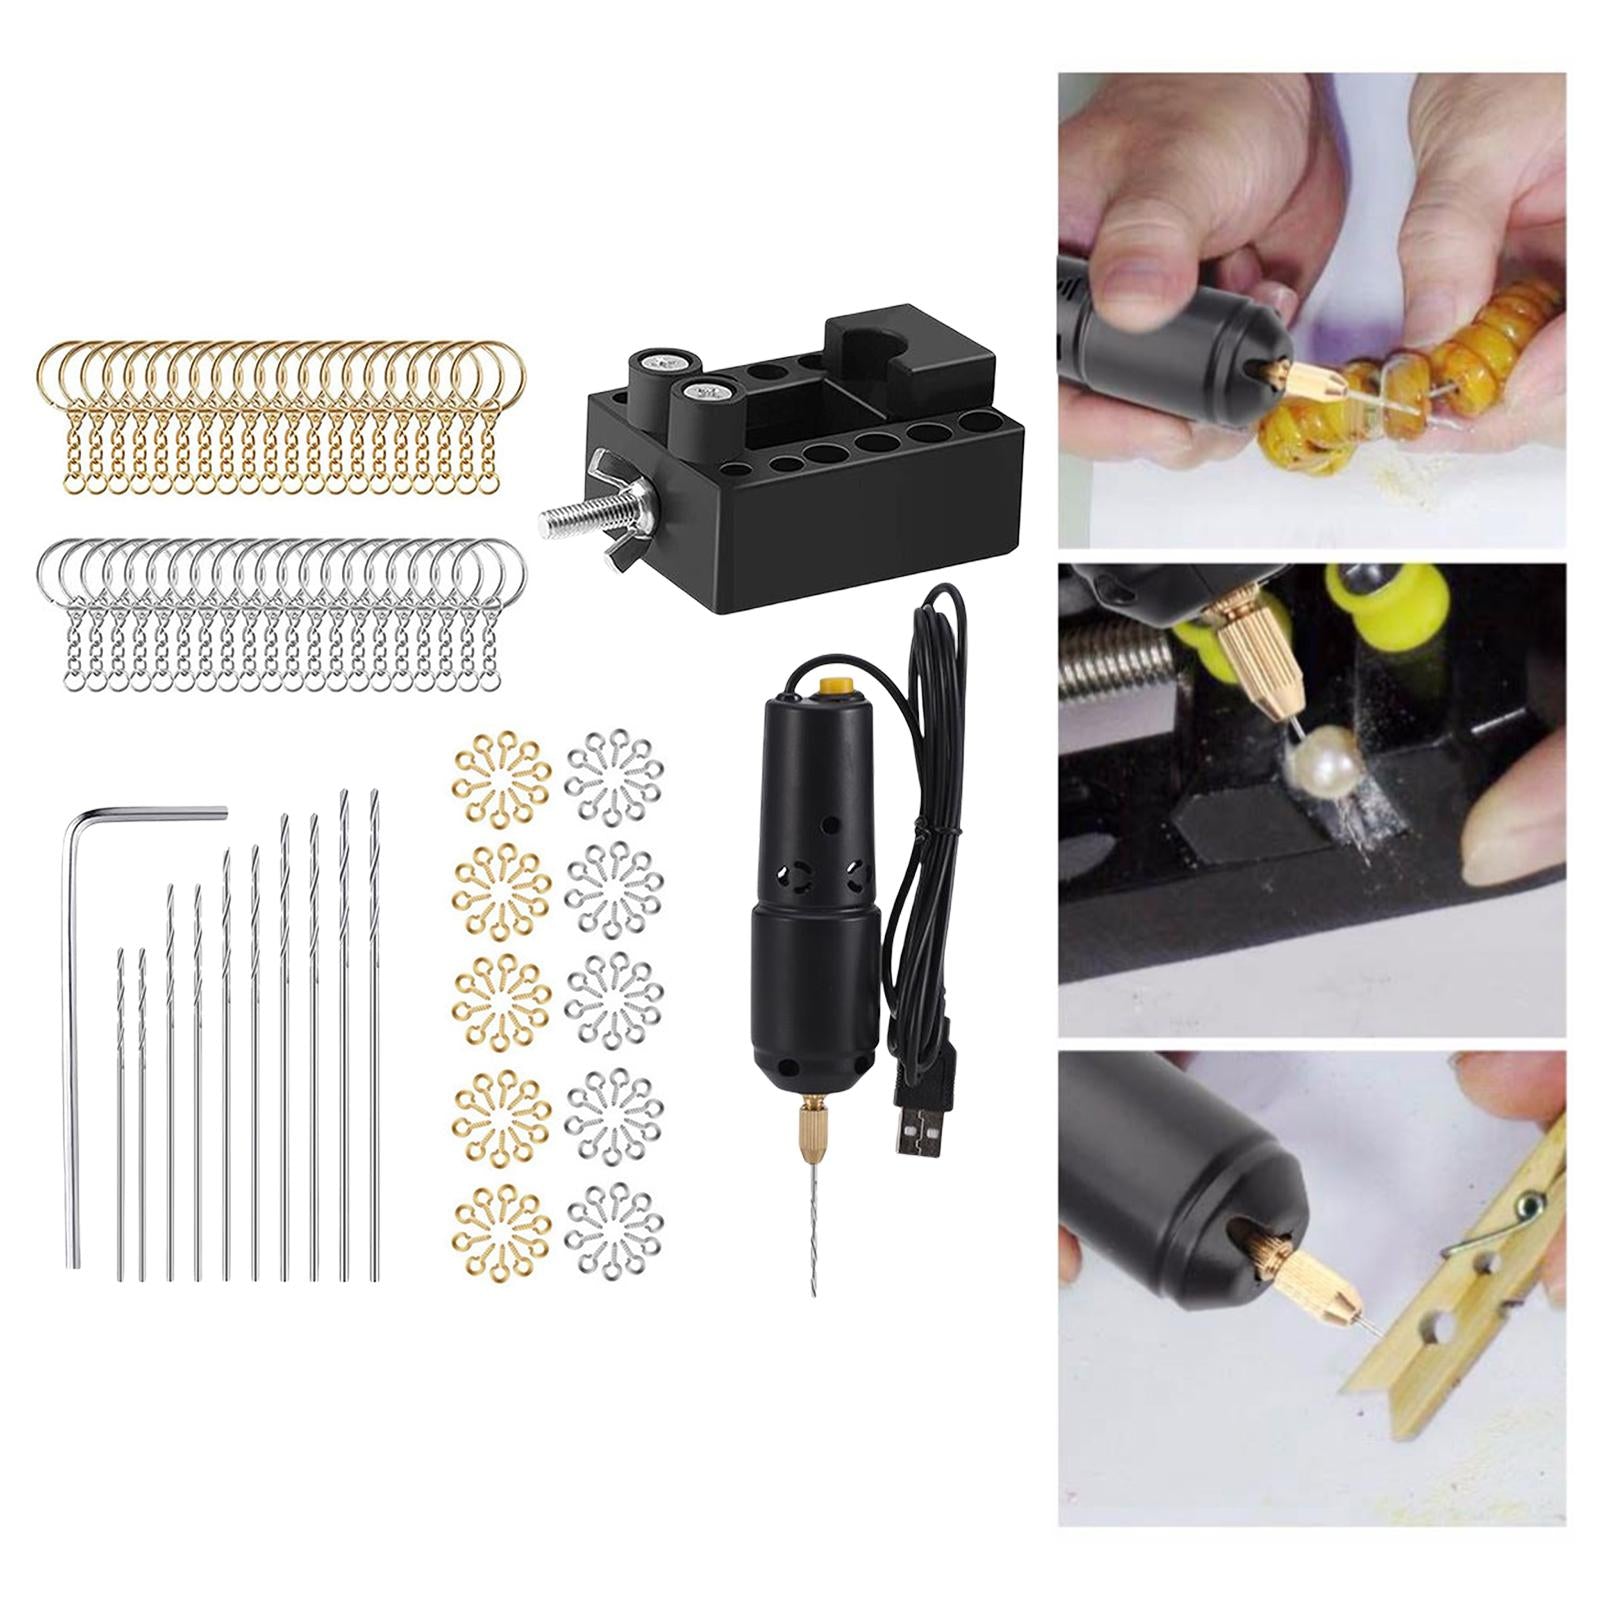 Portable Mini Electric Drill Engraver for Epoxy Resin Craft  With Parts